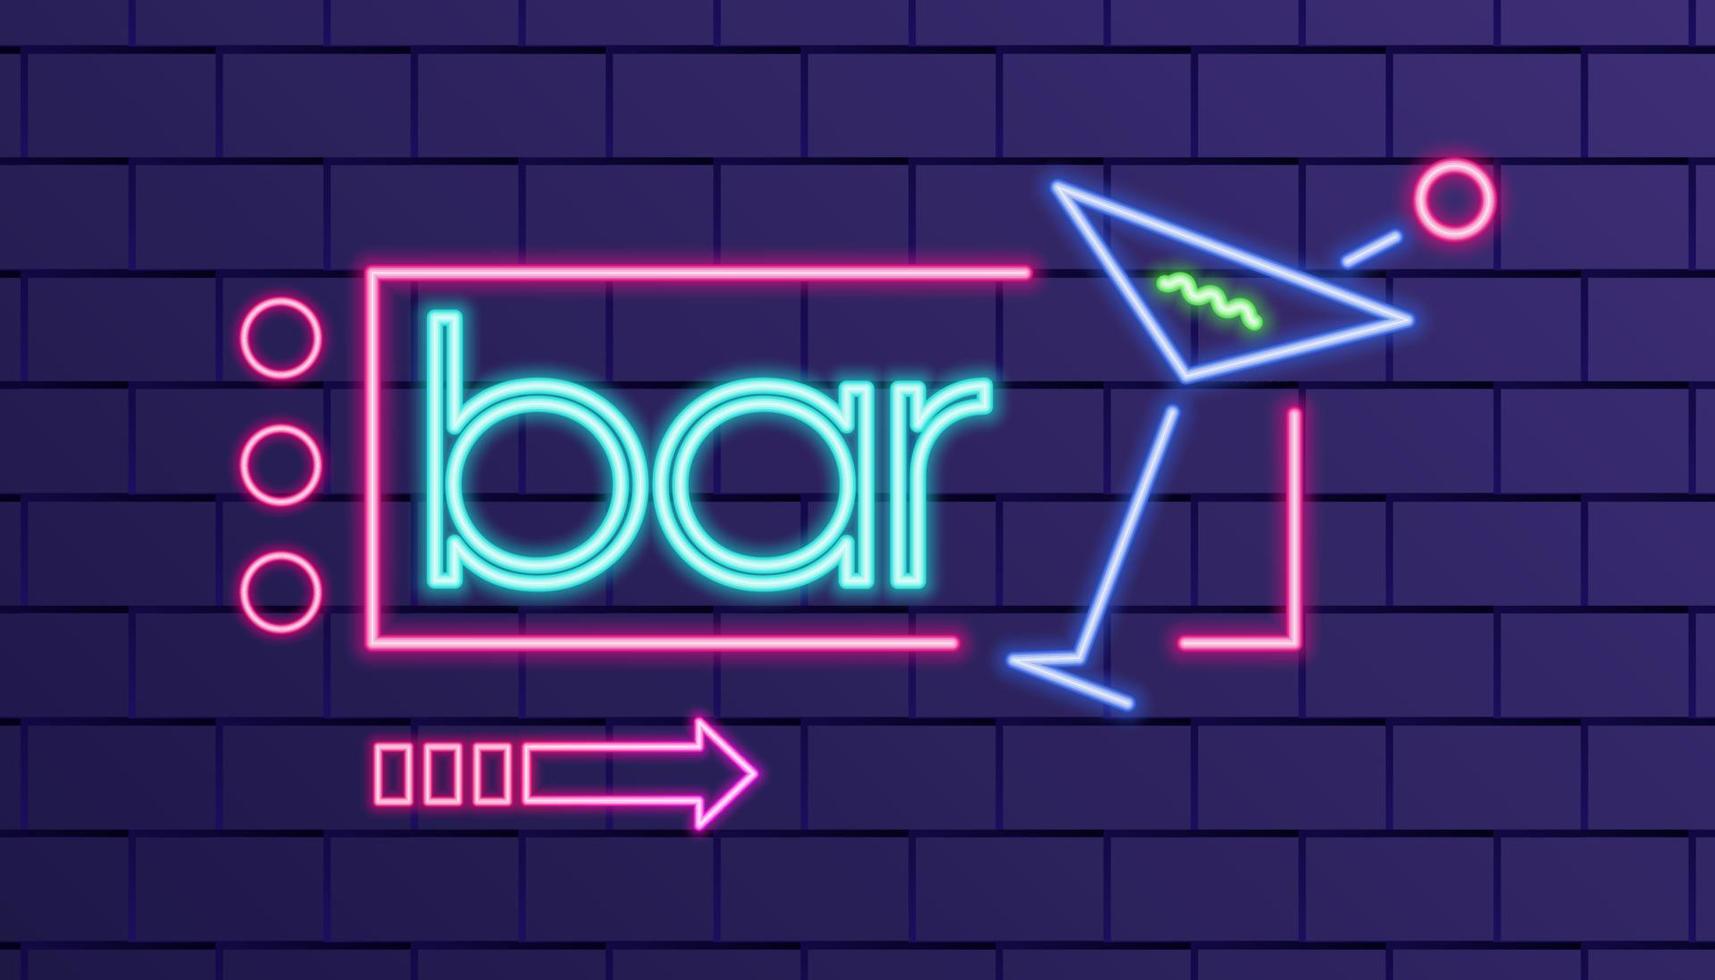 Bar neon sign with neon arrow on a brick wall, neon art, glowing electric light symbol, vector elements.